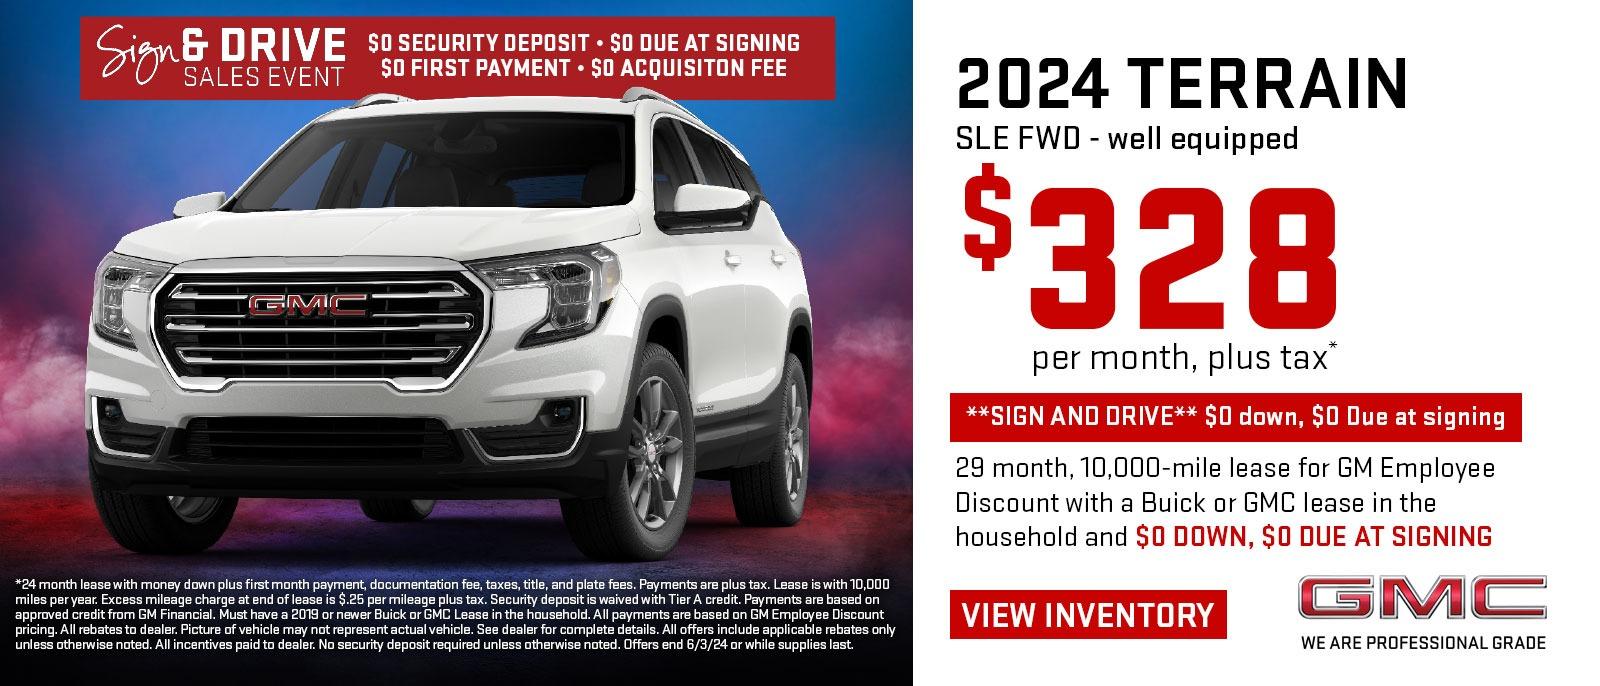 2024 Terrain SLE FWD -well equipped
$328 per month, plus tax*
**Sign And Drive**$0 down,$0 Due at signing
29 months, 10,000-mile lease for GM Employee Discount with a Buick or GMC lease in the household and $0 Down, $0 Due at signing